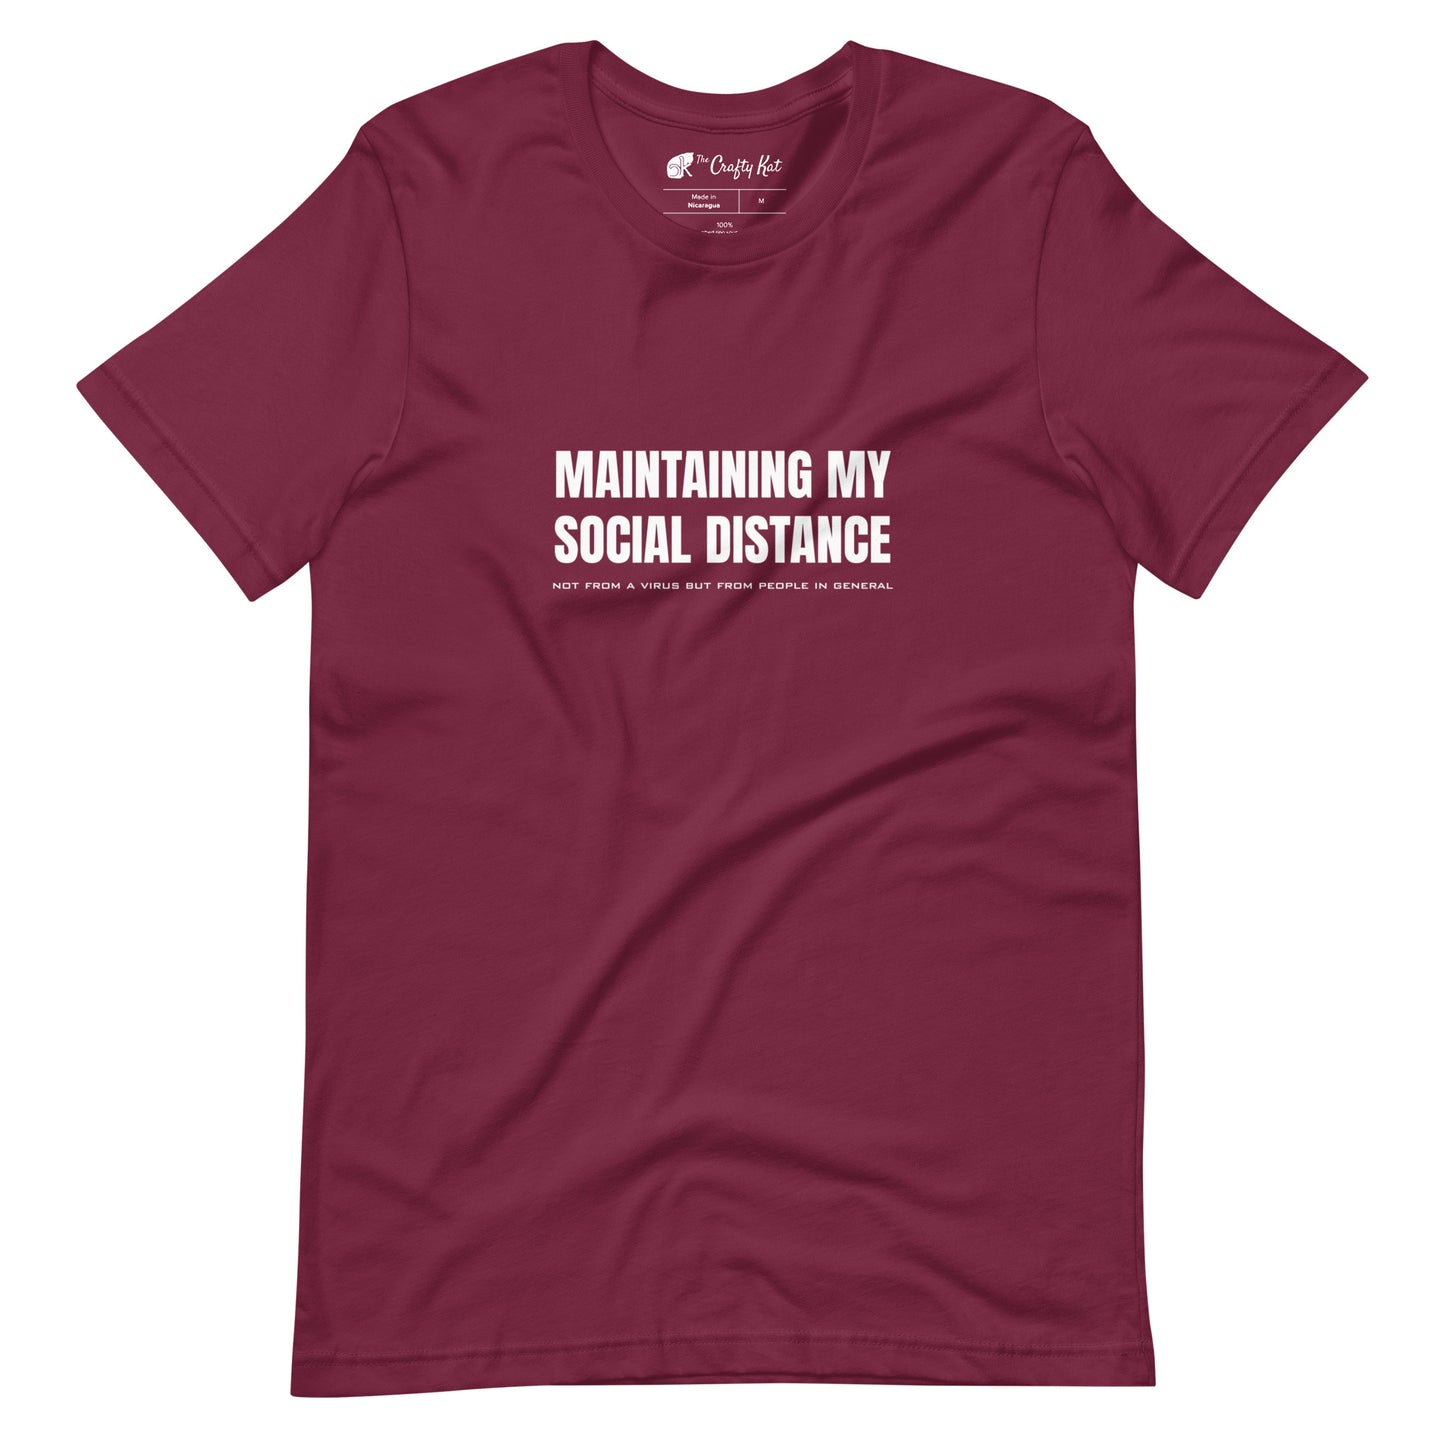 Maroon t-shirt with white graphic: "MAINTAINING MY SOCIAL DISTANCE not from a virus but from people in general"